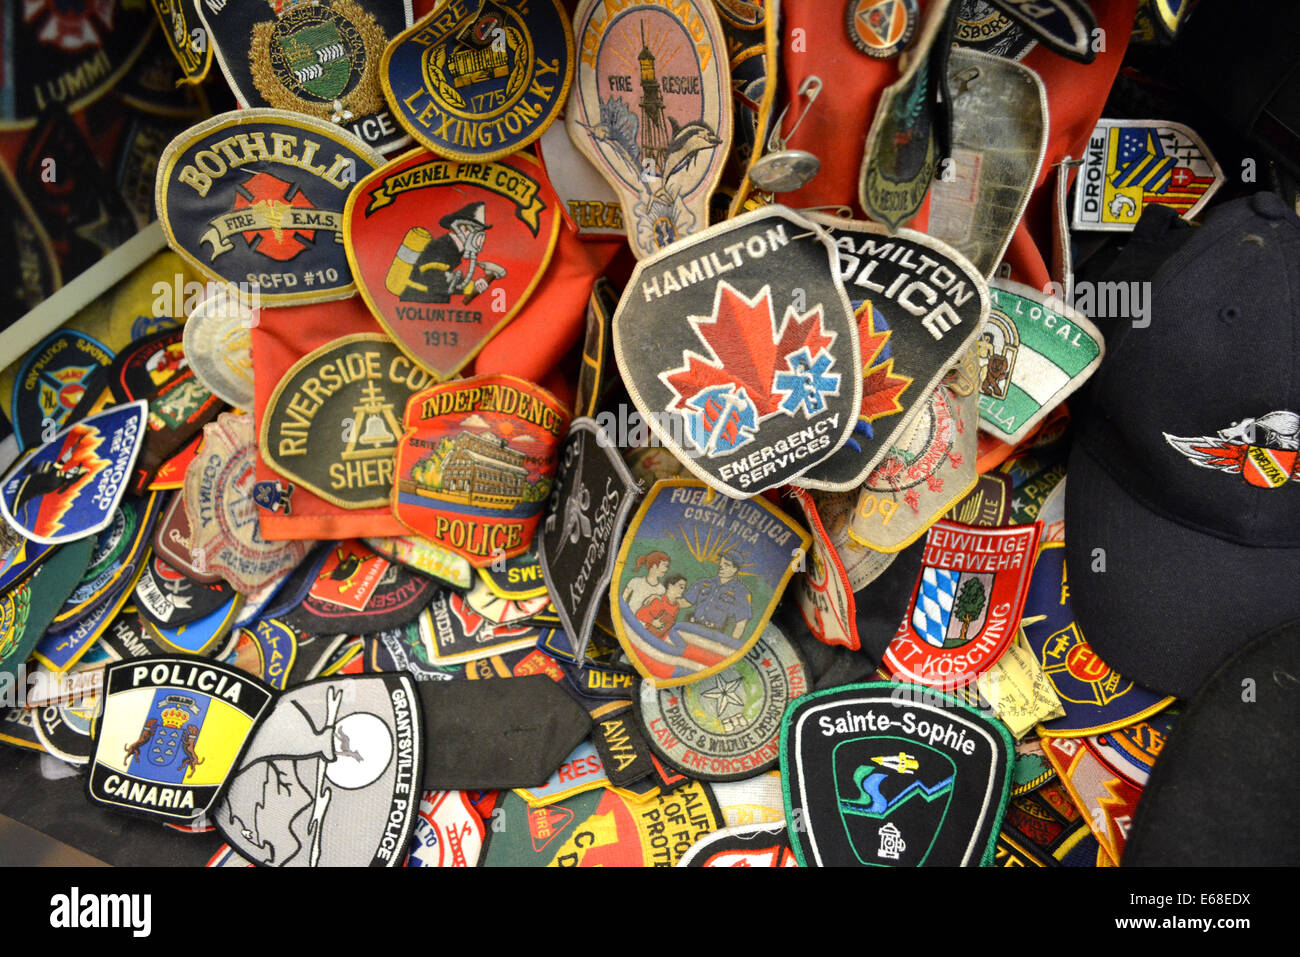 Fire Department and Police patches left at a 9/11 Memorial at Saint Paul's Church across from Ground Zero in New York City. Stock Photo